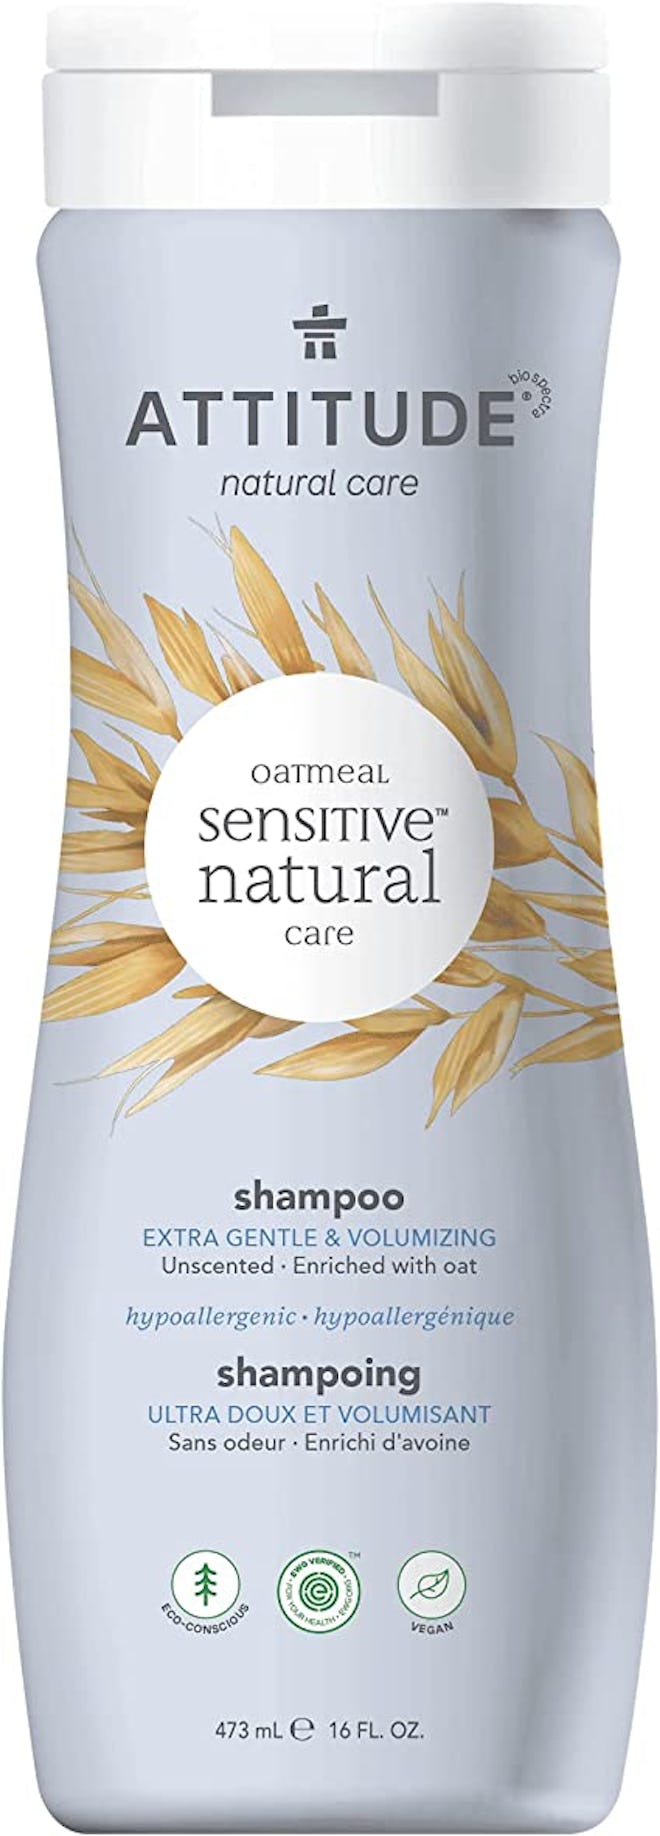 This unscented noncomedogenic shampoo is great for those who are sensitive to fragrance.